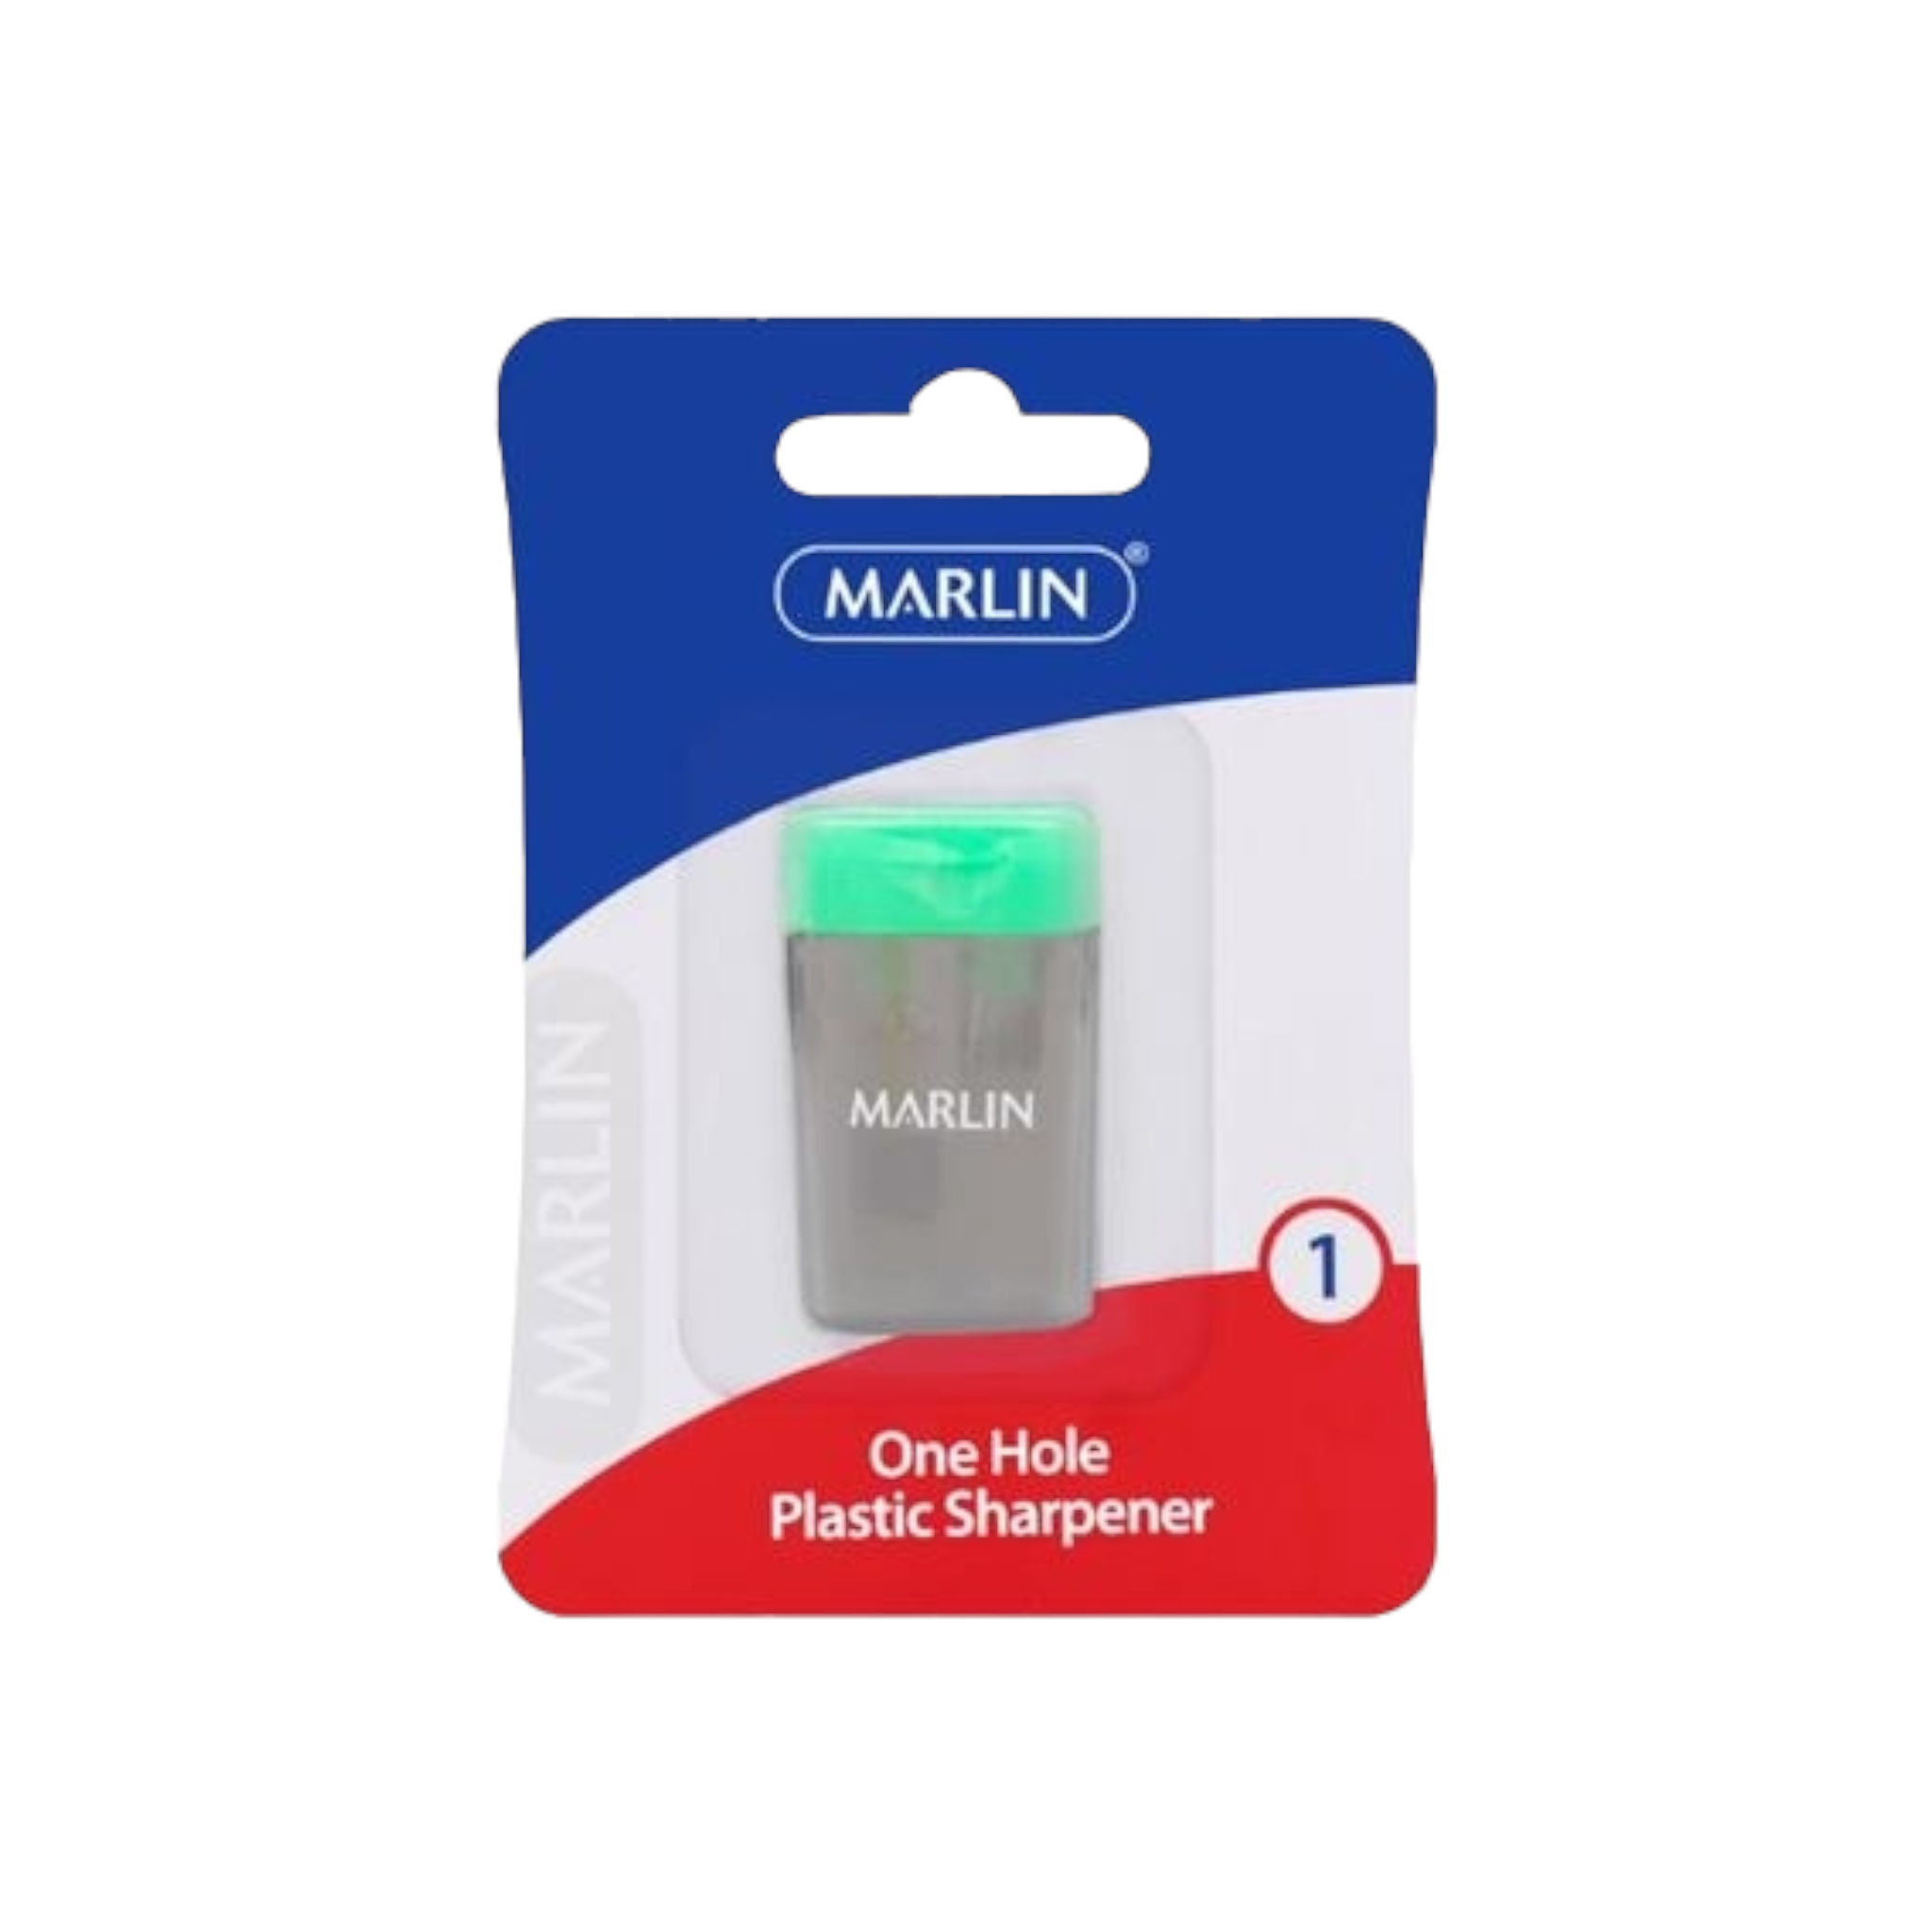 Marlin 1-Hole Plastic Sharpener with Waste Shavings Container